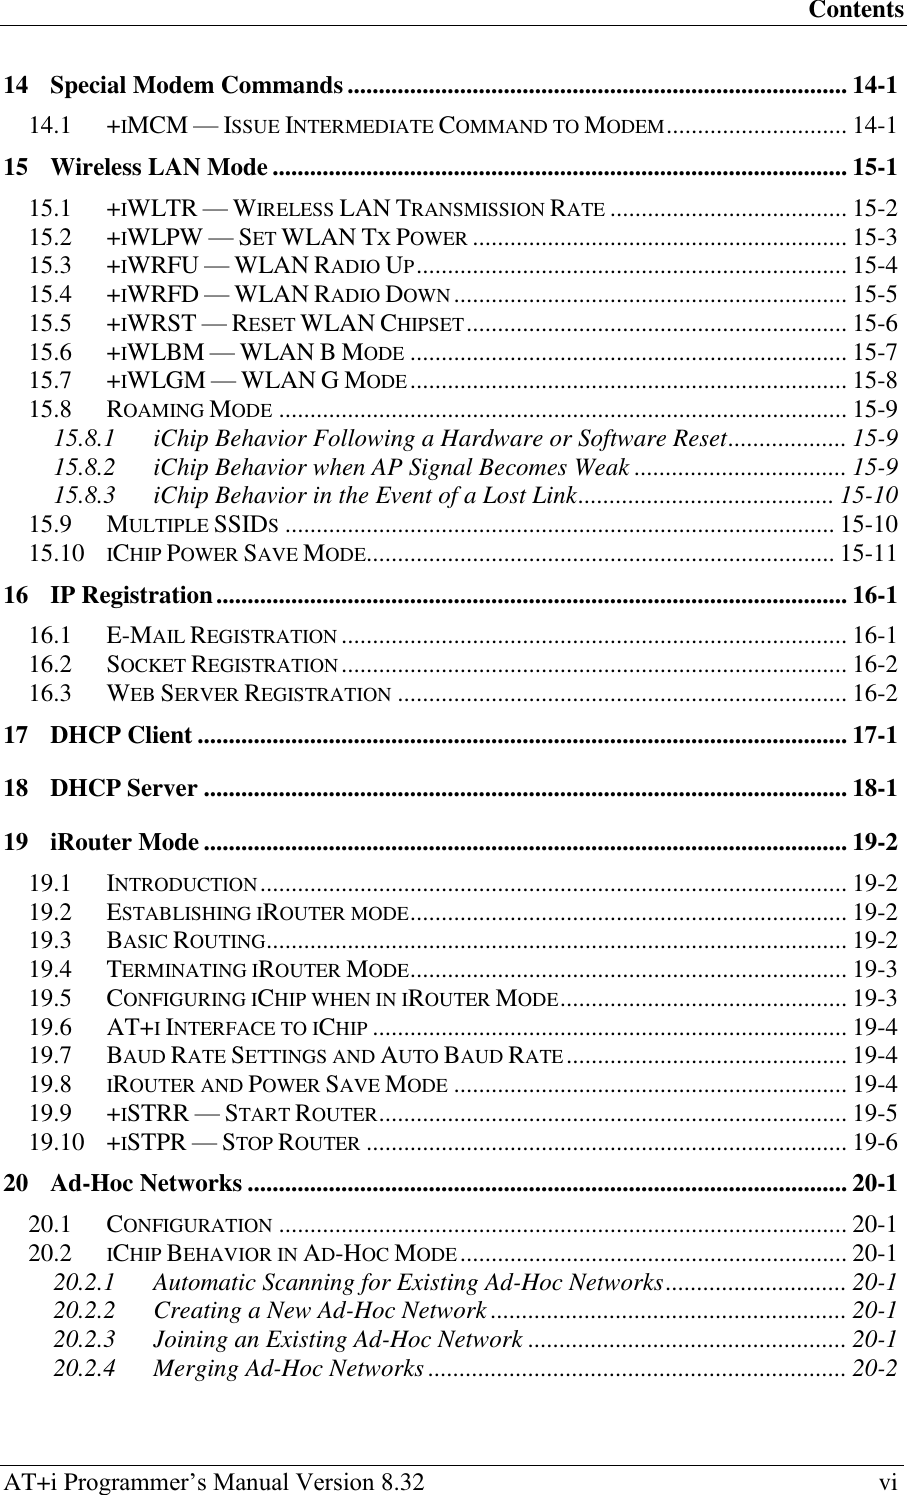 Contents AT+i Programmer‘s Manual Version 8.32  vi 14 Special Modem Commands ................................................................................ 14-1 14.1 +IMCM — ISSUE INTERMEDIATE COMMAND TO MODEM ............................. 14-1 15 Wireless LAN Mode ............................................................................................ 15-1 15.1 +IWLTR — WIRELESS LAN TRANSMISSION RATE ...................................... 15-2 15.2 +IWLPW — SET WLAN TX POWER ............................................................ 15-3 15.3 +IWRFU — WLAN RADIO UP ..................................................................... 15-4 15.4 +IWRFD — WLAN RADIO DOWN ............................................................... 15-5 15.5 +IWRST — RESET WLAN CHIPSET ............................................................. 15-6 15.6 +IWLBM — WLAN B MODE ...................................................................... 15-7 15.7 +IWLGM — WLAN G MODE ...................................................................... 15-8 15.8 ROAMING MODE ........................................................................................... 15-9 15.8.1 iChip Behavior Following a Hardware or Software Reset ................... 15-9 15.8.2 iChip Behavior when AP Signal Becomes Weak .................................. 15-9 15.8.3 iChip Behavior in the Event of a Lost Link ......................................... 15-10 15.9 MULTIPLE SSIDS ........................................................................................ 15-10 15.10 ICHIP POWER SAVE MODE........................................................................... 15-11 16 IP Registration ..................................................................................................... 16-1 16.1 E-MAIL REGISTRATION ................................................................................. 16-1 16.2 SOCKET REGISTRATION ................................................................................. 16-2 16.3 WEB SERVER REGISTRATION ........................................................................ 16-2 17 DHCP Client ........................................................................................................ 17-1 18 DHCP Server ....................................................................................................... 18-1 19 iRouter Mode ....................................................................................................... 19-2 19.1 INTRODUCTION .............................................................................................. 19-2 19.2 ESTABLISHING IROUTER MODE ...................................................................... 19-2 19.3 BASIC ROUTING ............................................................................................. 19-2 19.4 TERMINATING IROUTER MODE ...................................................................... 19-3 19.5 CONFIGURING ICHIP WHEN IN IROUTER MODE .............................................. 19-3 19.6 AT+I INTERFACE TO ICHIP ............................................................................ 19-4 19.7 BAUD RATE SETTINGS AND AUTO BAUD RATE ............................................. 19-4 19.8 IROUTER AND POWER SAVE MODE ............................................................... 19-4 19.9 +ISTRR — START ROUTER ........................................................................... 19-5 19.10 +ISTPR — STOP ROUTER ............................................................................. 19-6 20 Ad-Hoc Networks ................................................................................................ 20-1 20.1 CONFIGURATION ........................................................................................... 20-1 20.2 ICHIP BEHAVIOR IN AD-HOC MODE .............................................................. 20-1 20.2.1 Automatic Scanning for Existing Ad-Hoc Networks ............................. 20-1 20.2.2 Creating a New Ad-Hoc Network ......................................................... 20-1 20.2.3 Joining an Existing Ad-Hoc Network ................................................... 20-1 20.2.4 Merging Ad-Hoc Networks ................................................................... 20-2 